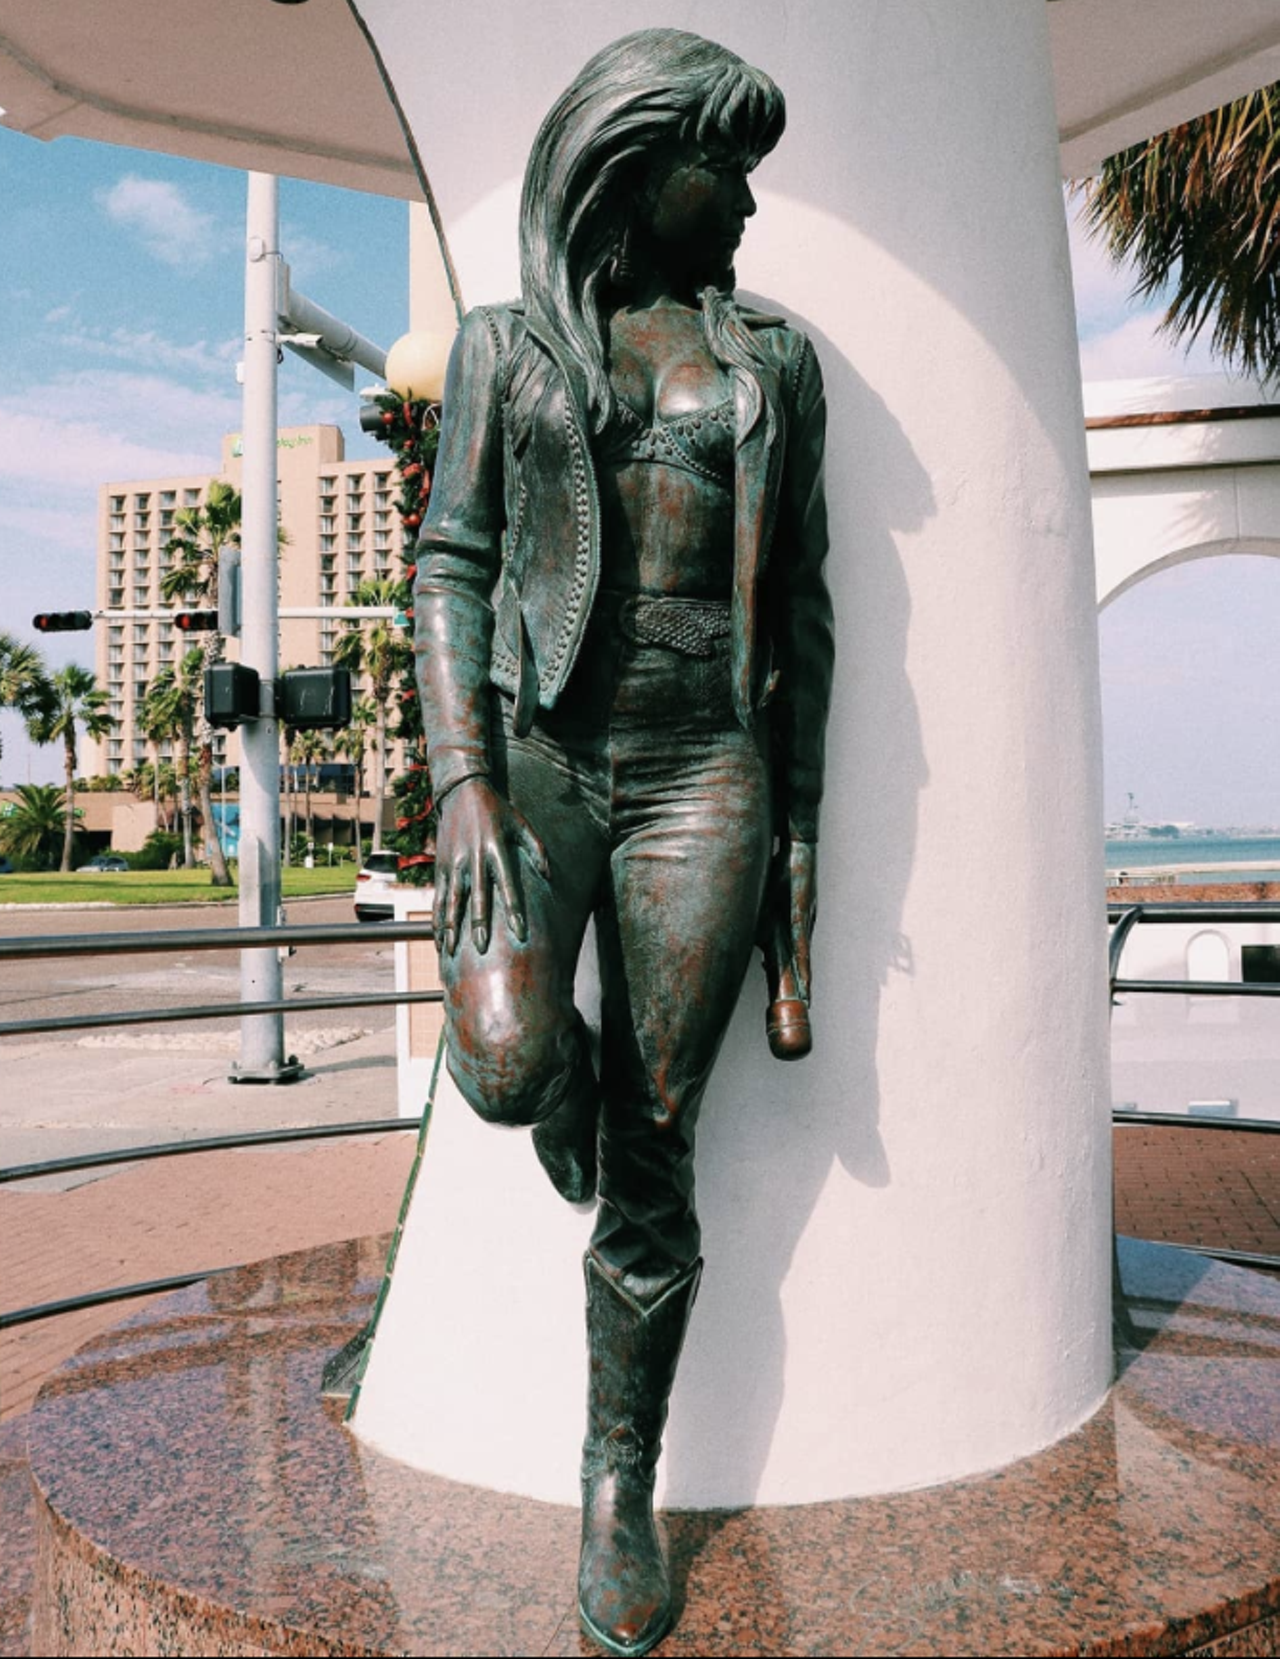 Selena was a fan of Whataburger.
The Queen of Tejano reportedly loved Whataburger. Visitors routinely leave flowers and Whataburger meals at her monument in her hometown — and Whataburger birthplace — of Corpus Christi.
Photo via Instagram / luisalove29